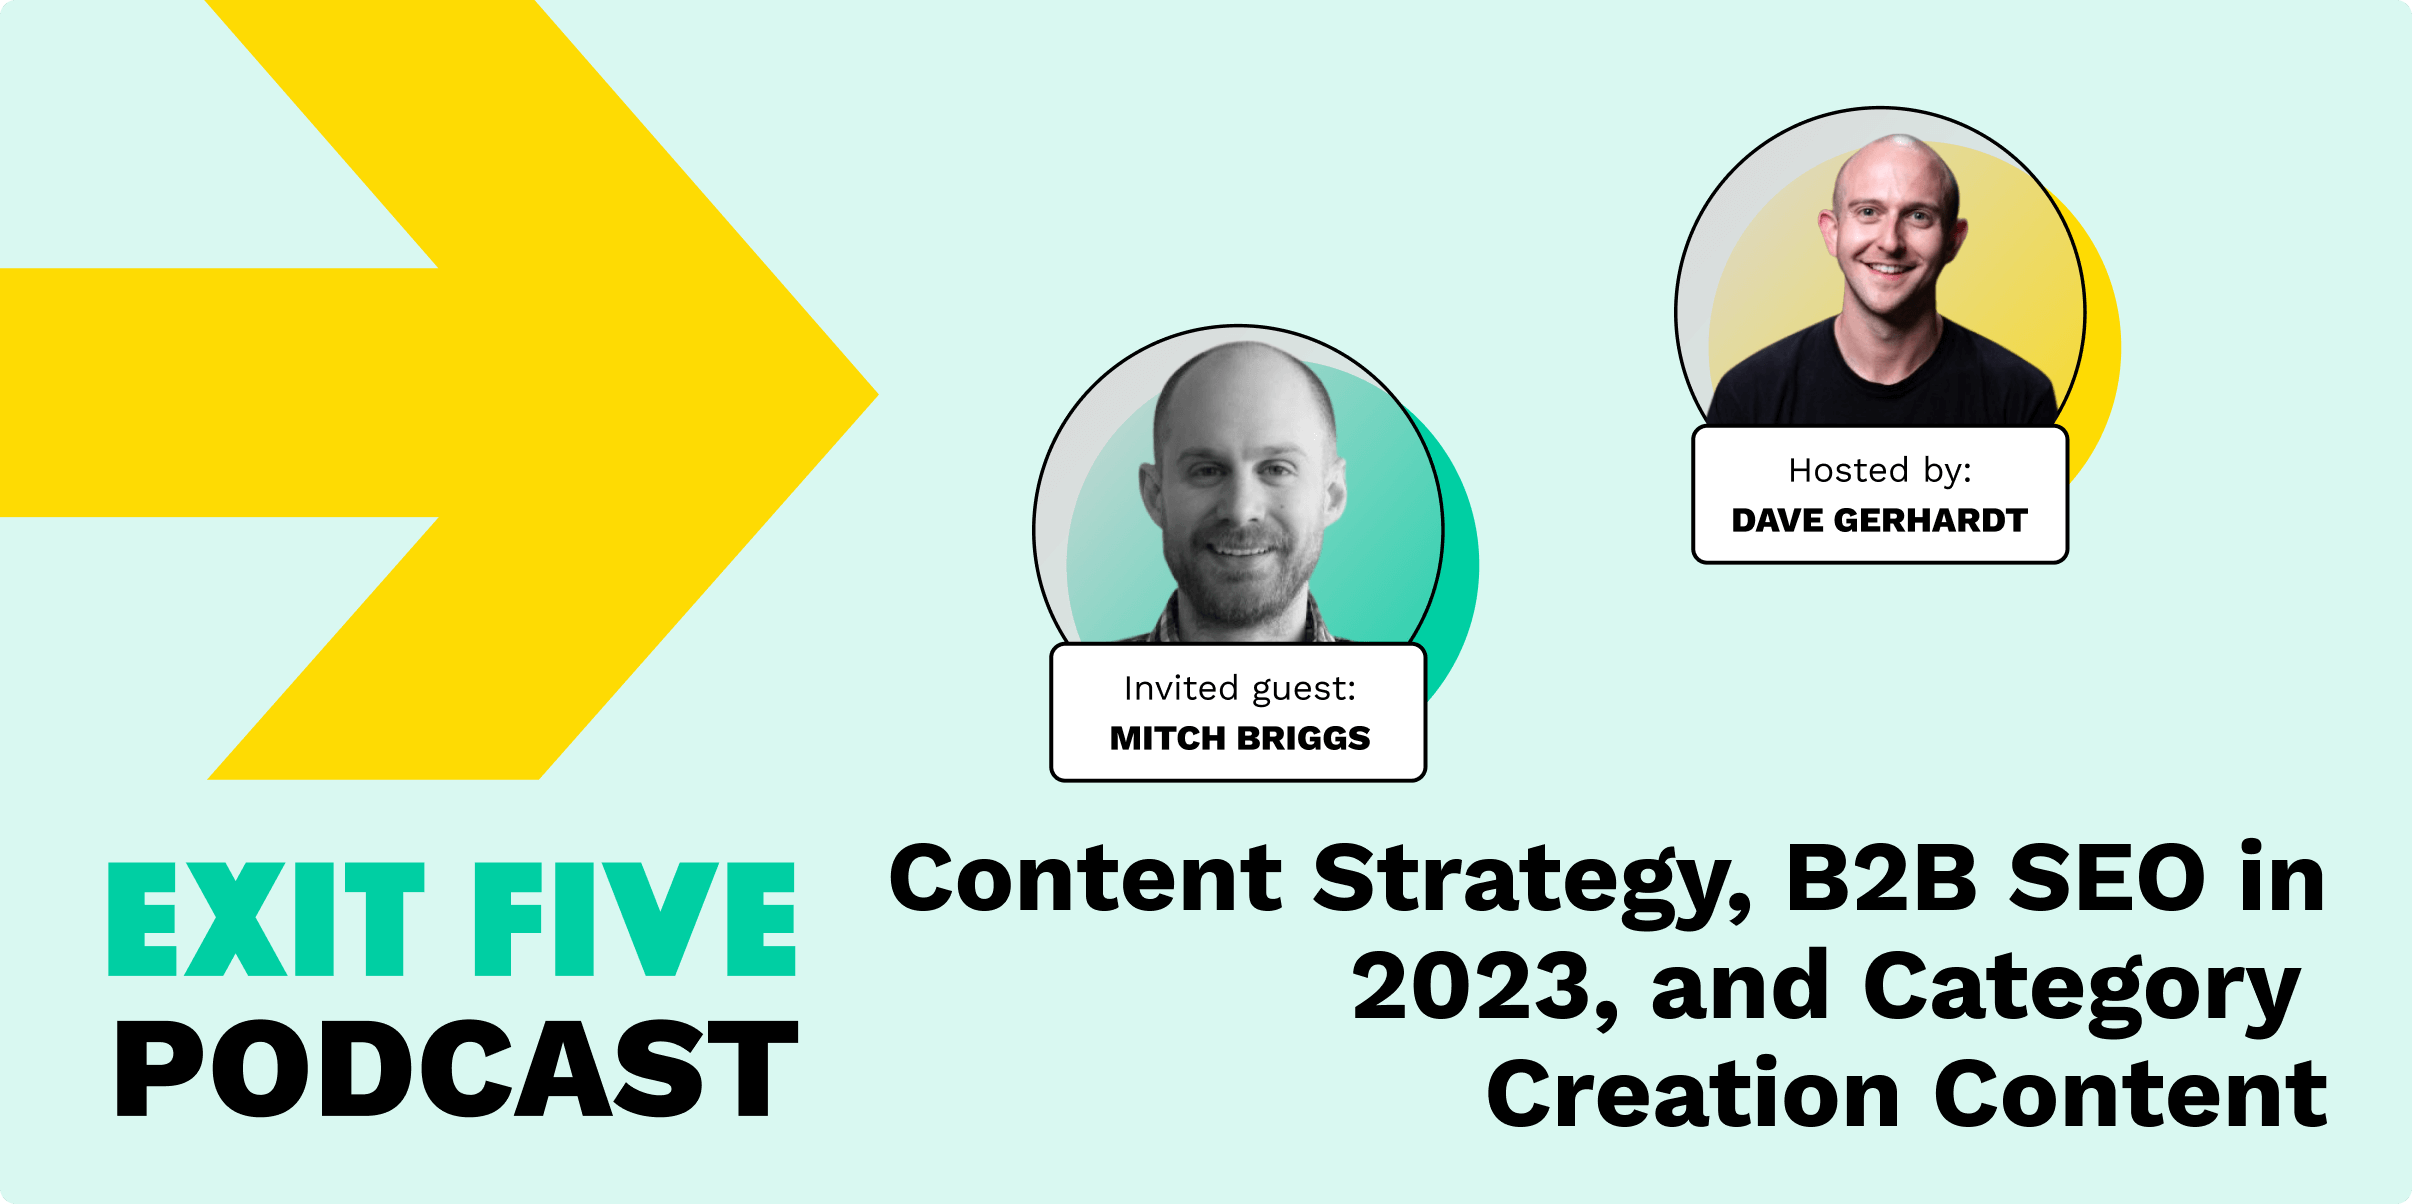 Content Strategy, B2B SEO in 2023, and Category Creation Content